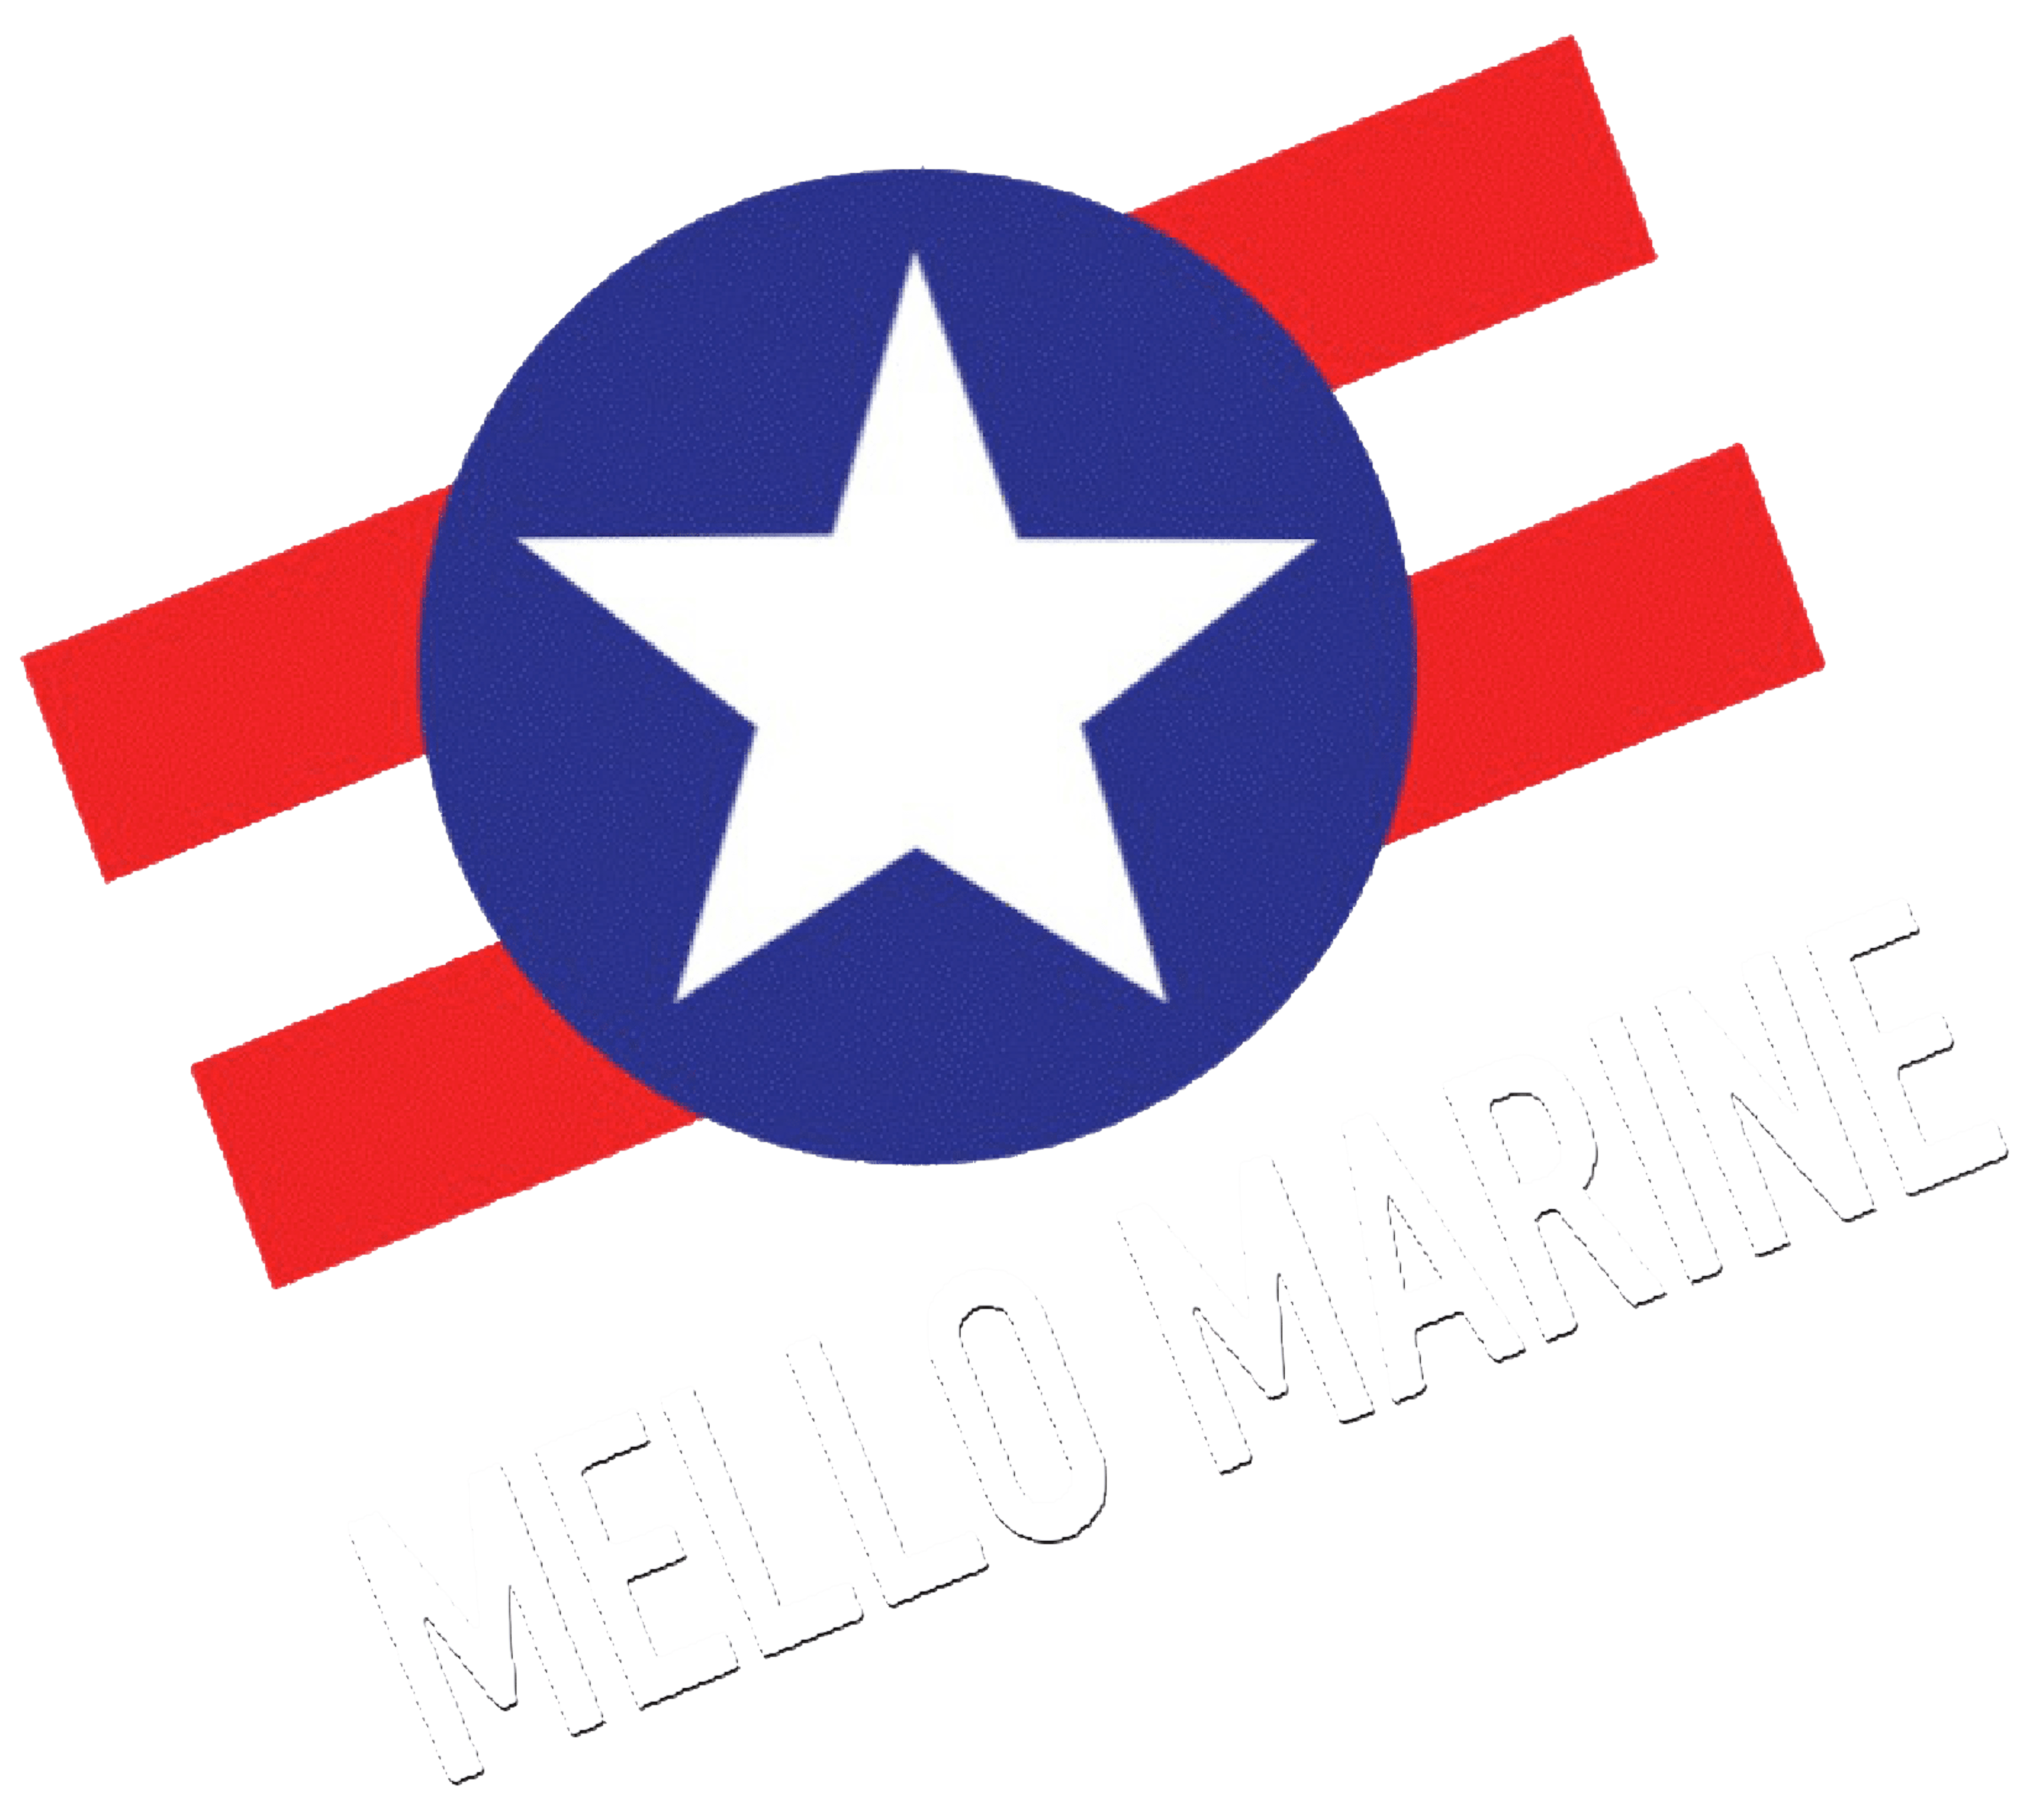 Mello Marine is a Centurion, Supreme, and Four Winns dealer for new and used boats, as well as parts and services in Folsom, California and near Sacramento, Rocklin, Roseville, Granite Bay, Folsom.